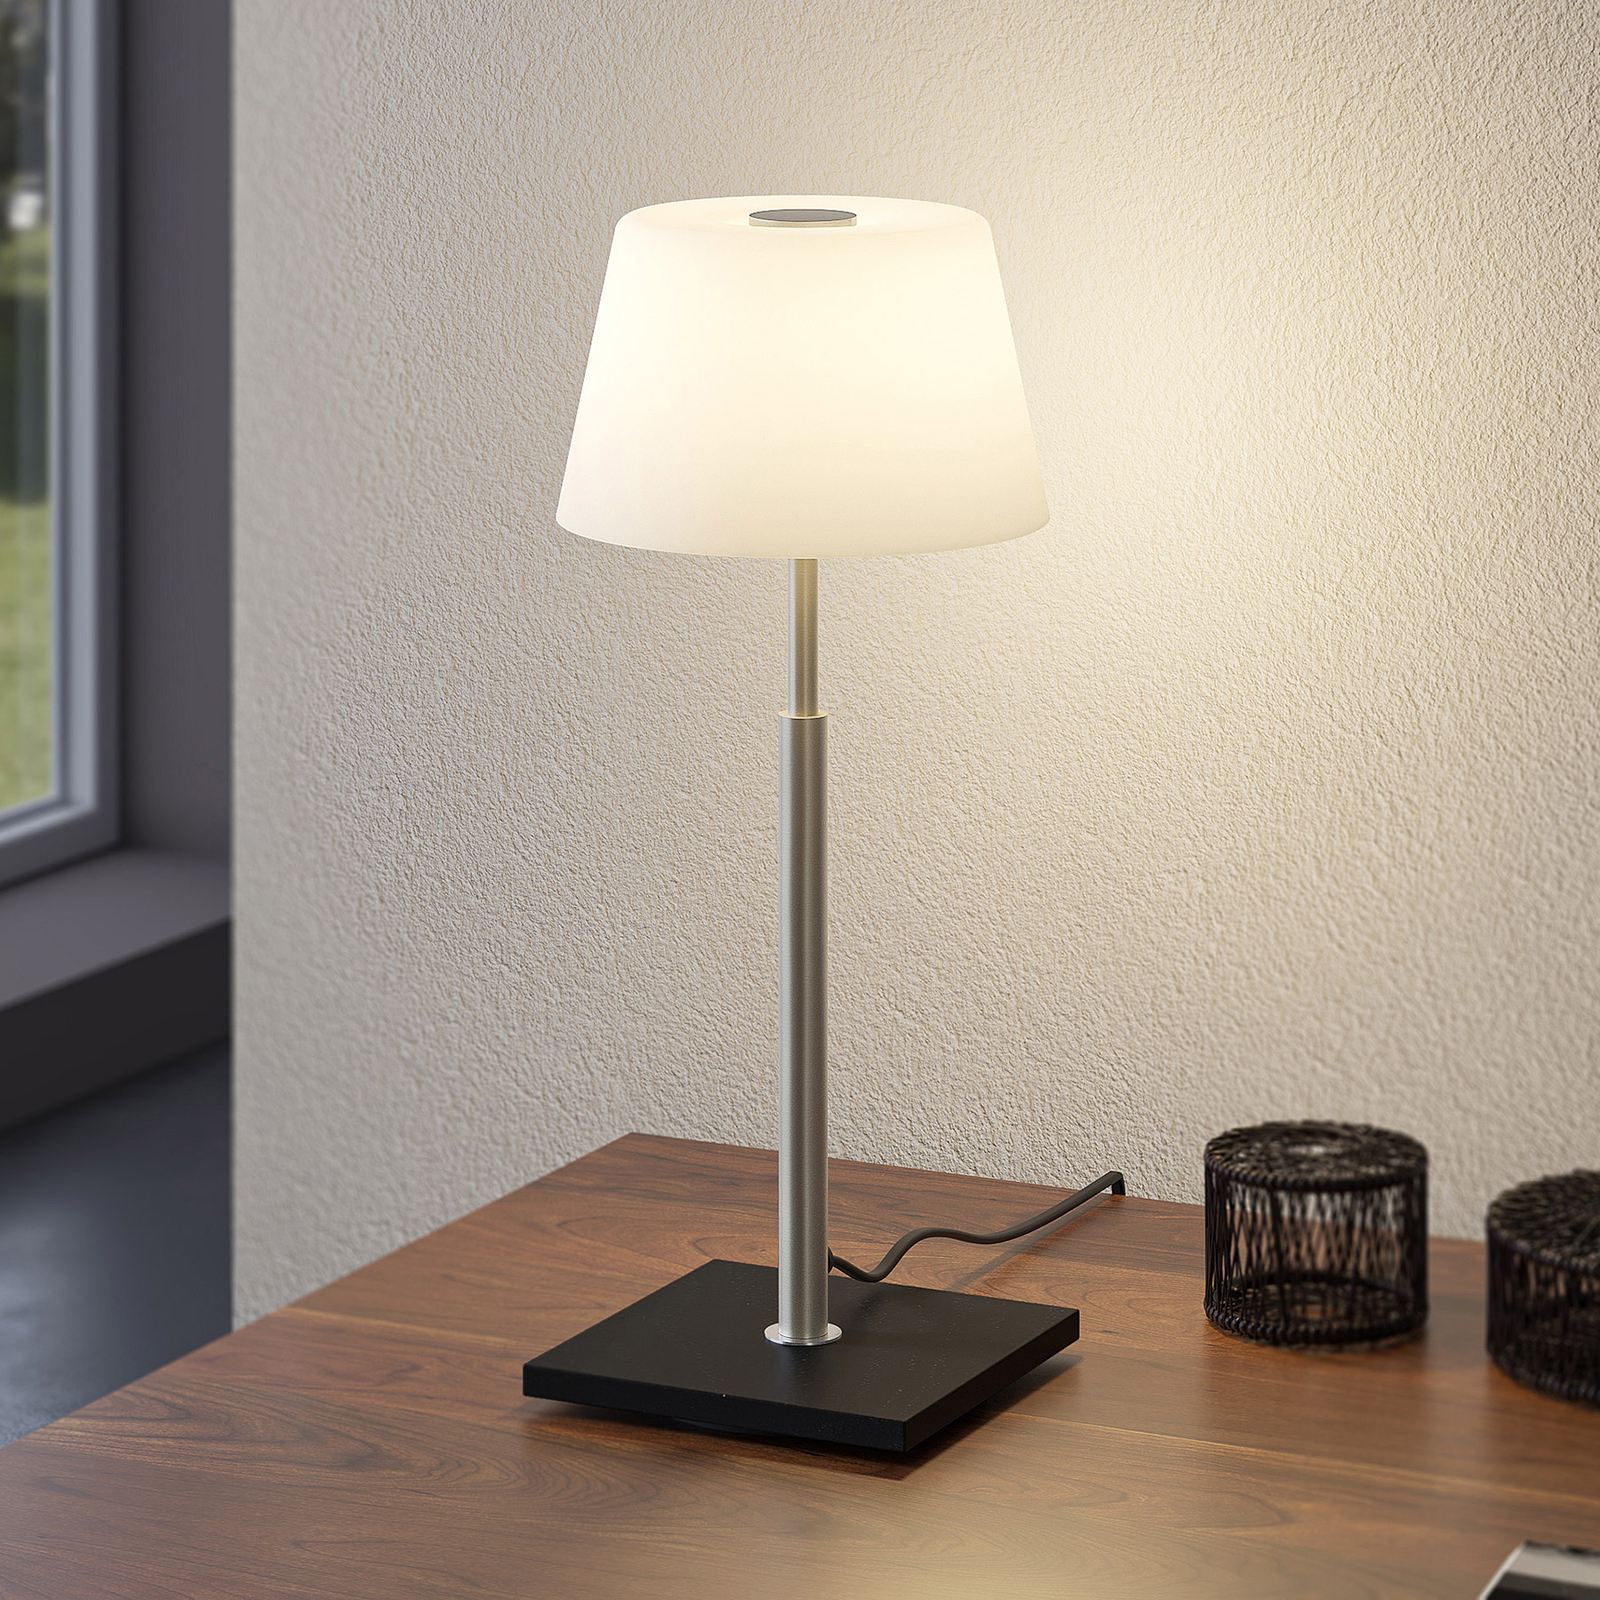 Lucande Madita table lamp with base in ash wood